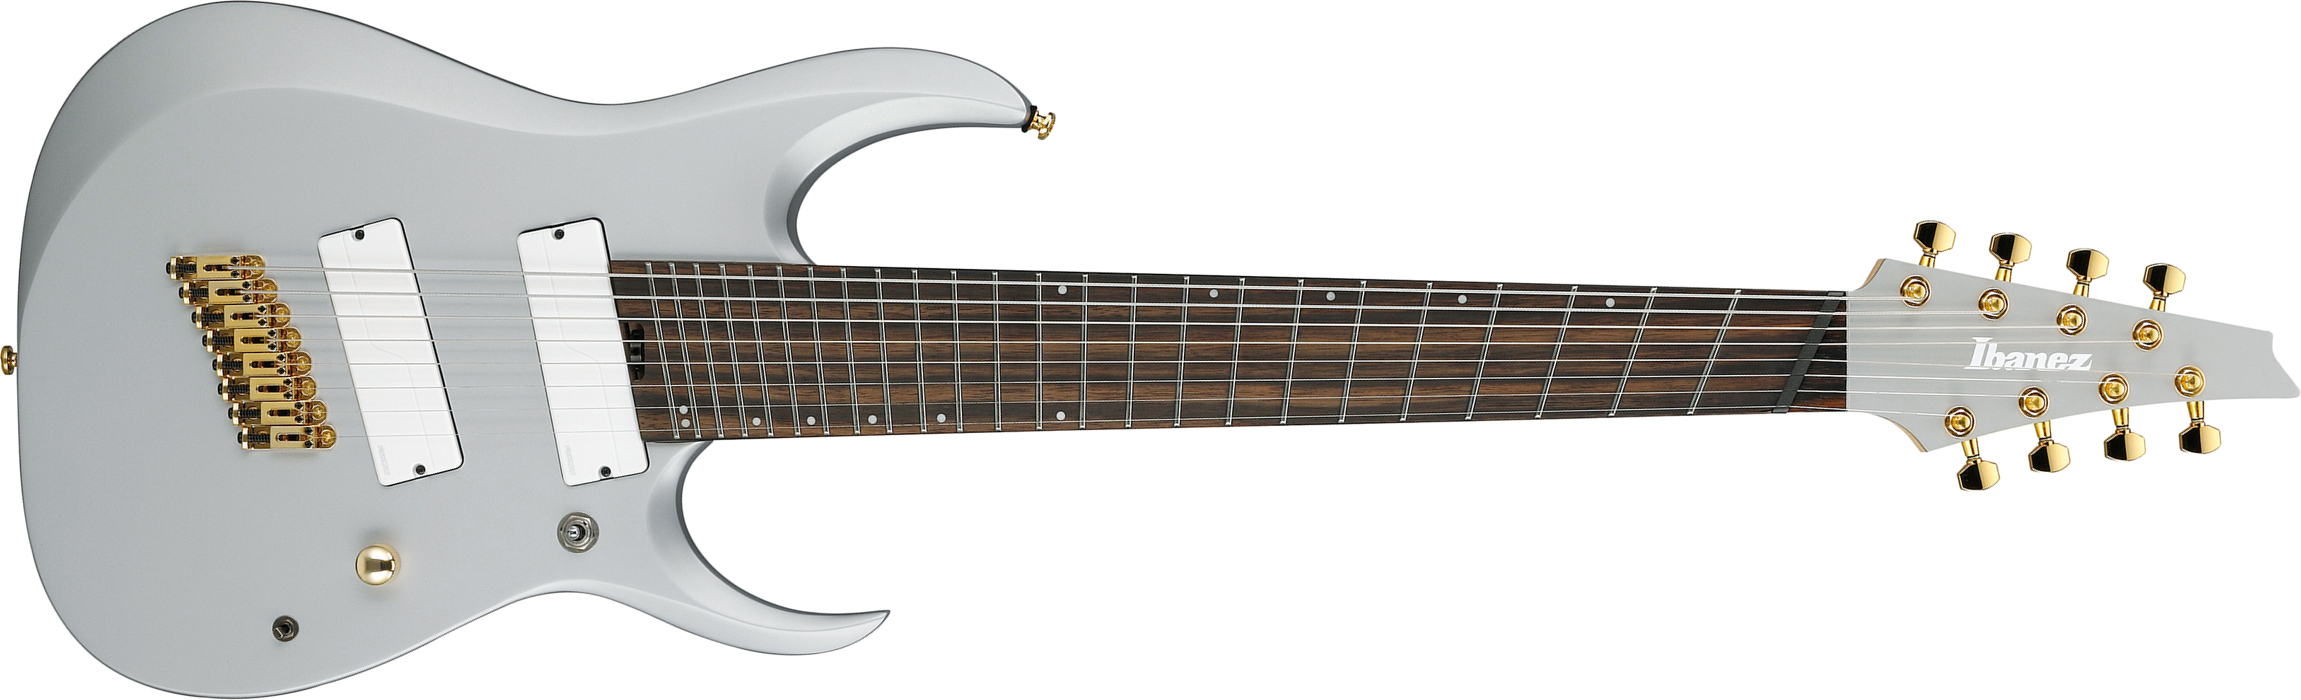 Ibanez Rgdms8 Csm Axe Design Lab 8c Multiscale 2h Fishman Fluence Modern Ht Eb - Classic Silver Matte - 8 and 9 string electric guitar - Main picture